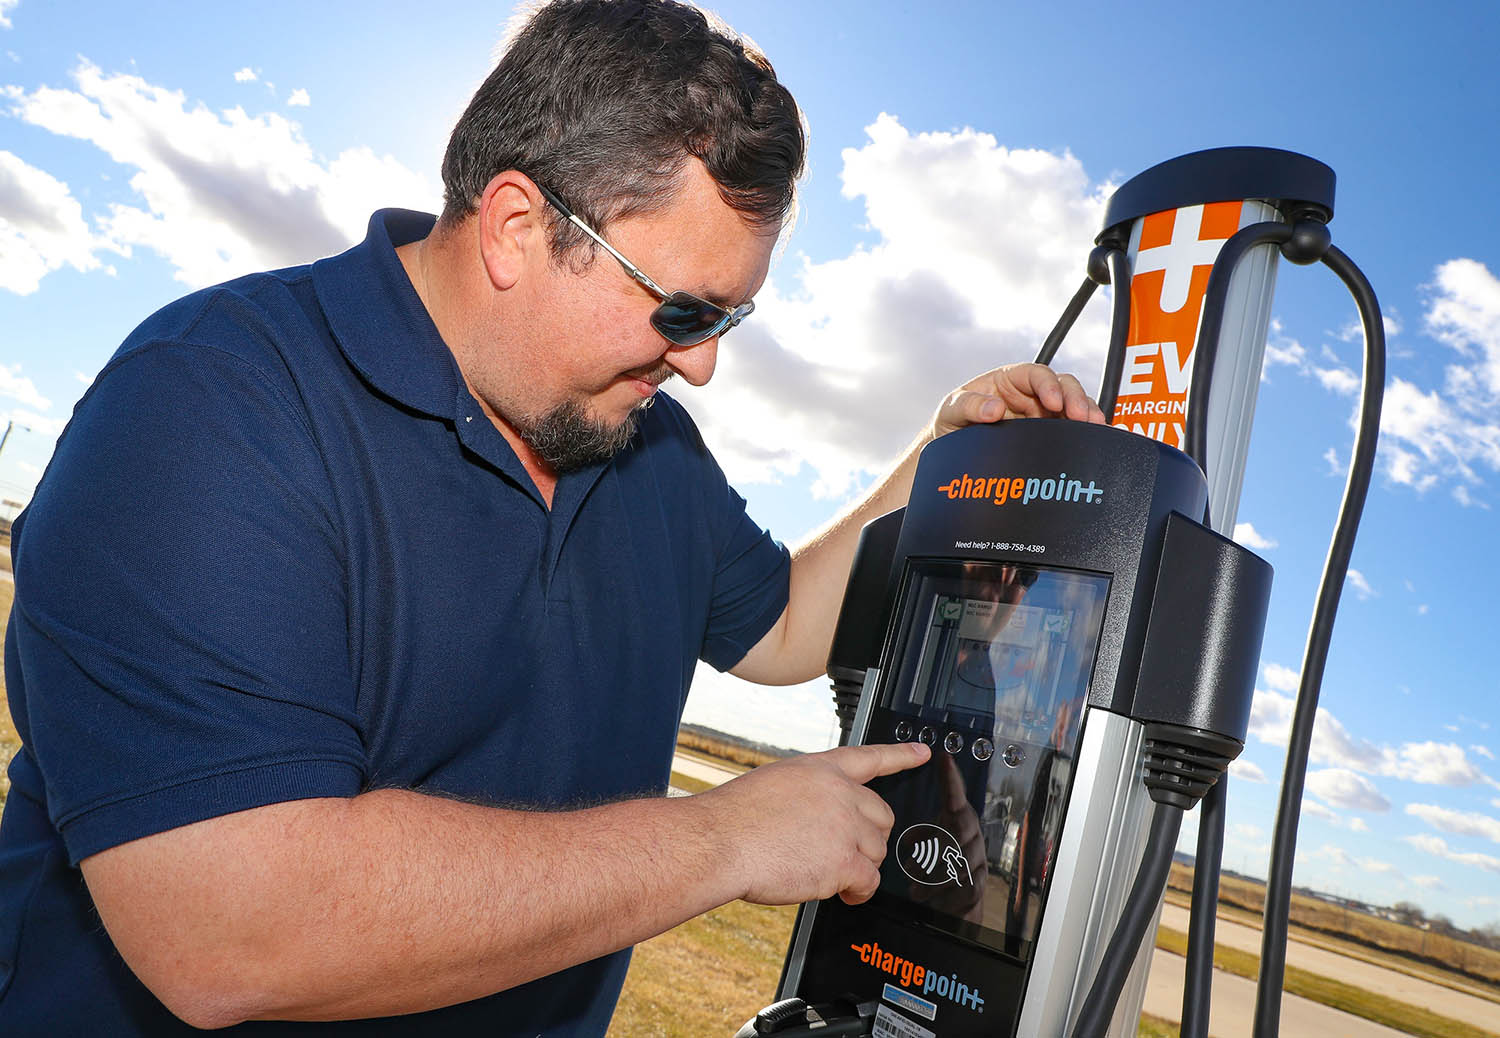 Consumer safety manager Marshall Barth demonstrates the electric vehicle charging station recently installed at the Nebraska Safety Center’s driving range. The charging station is available for public use.